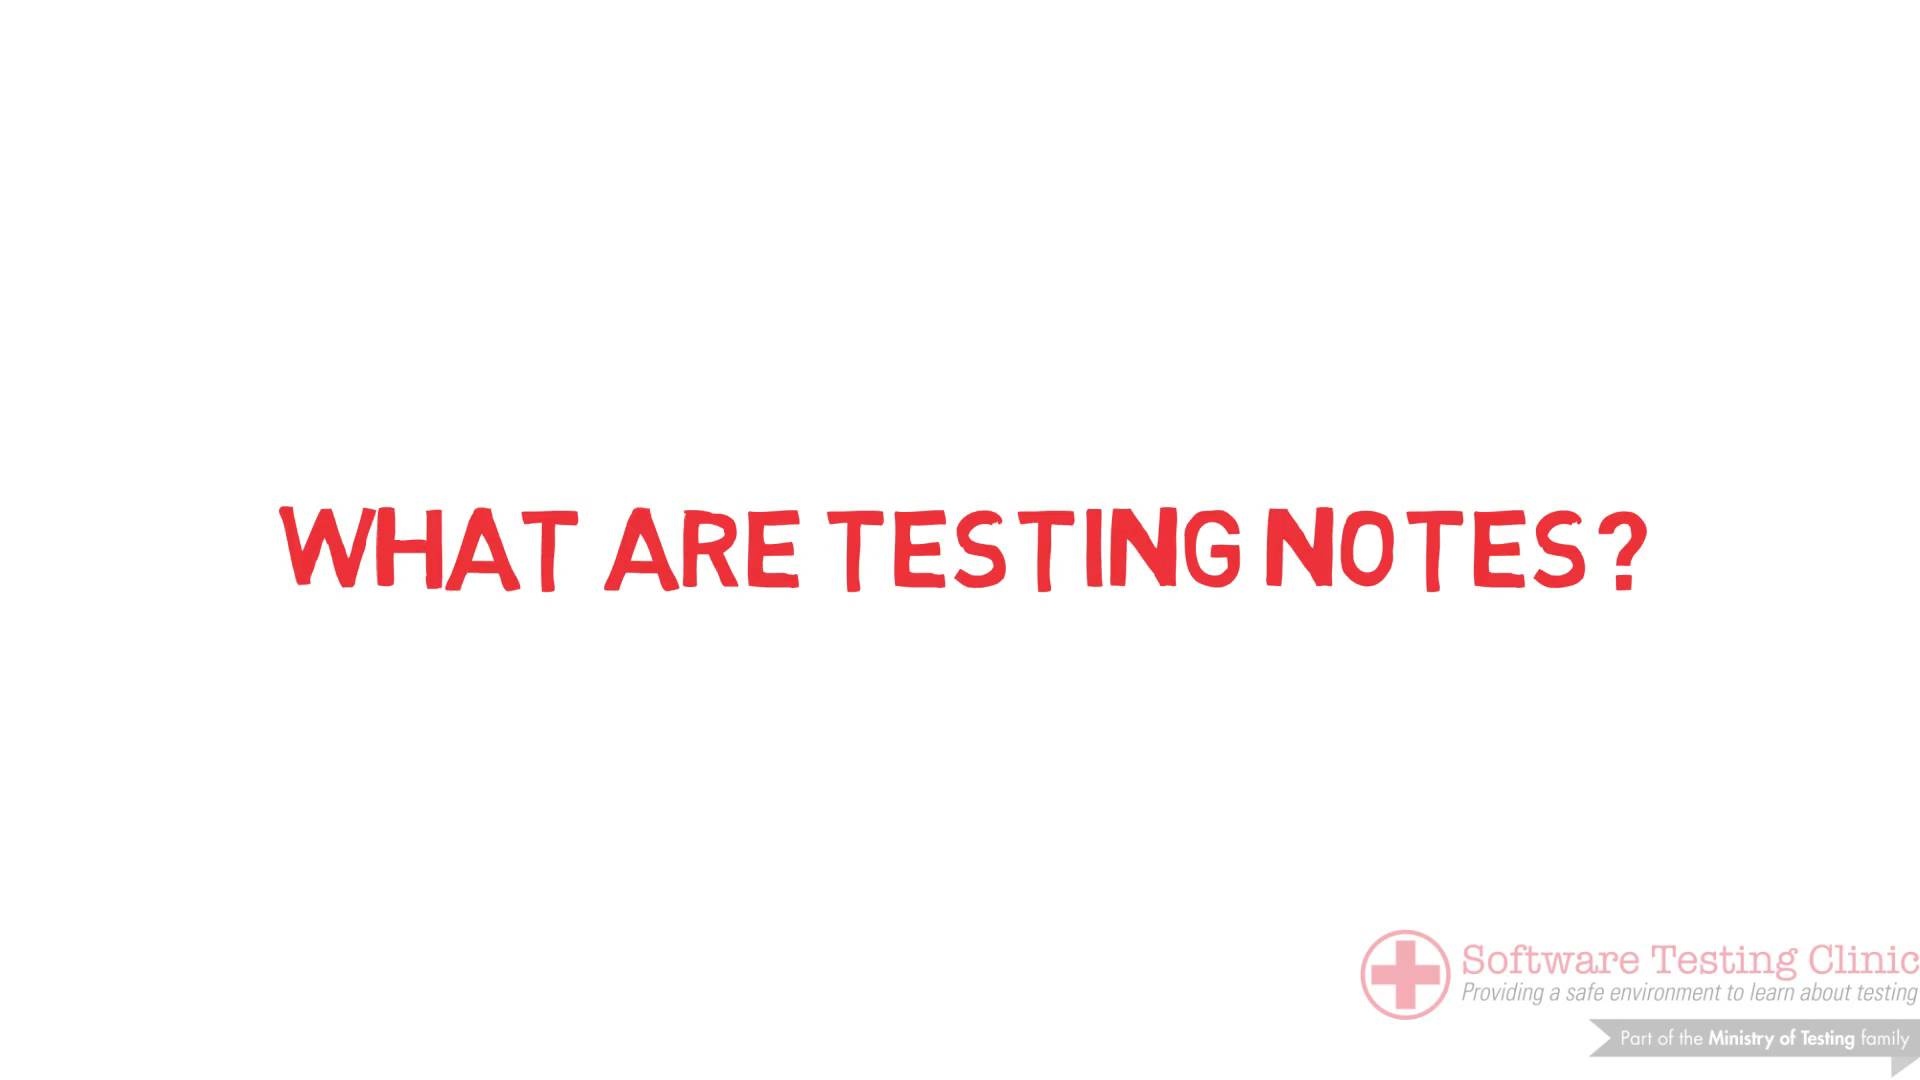 What are Testing Notes? image